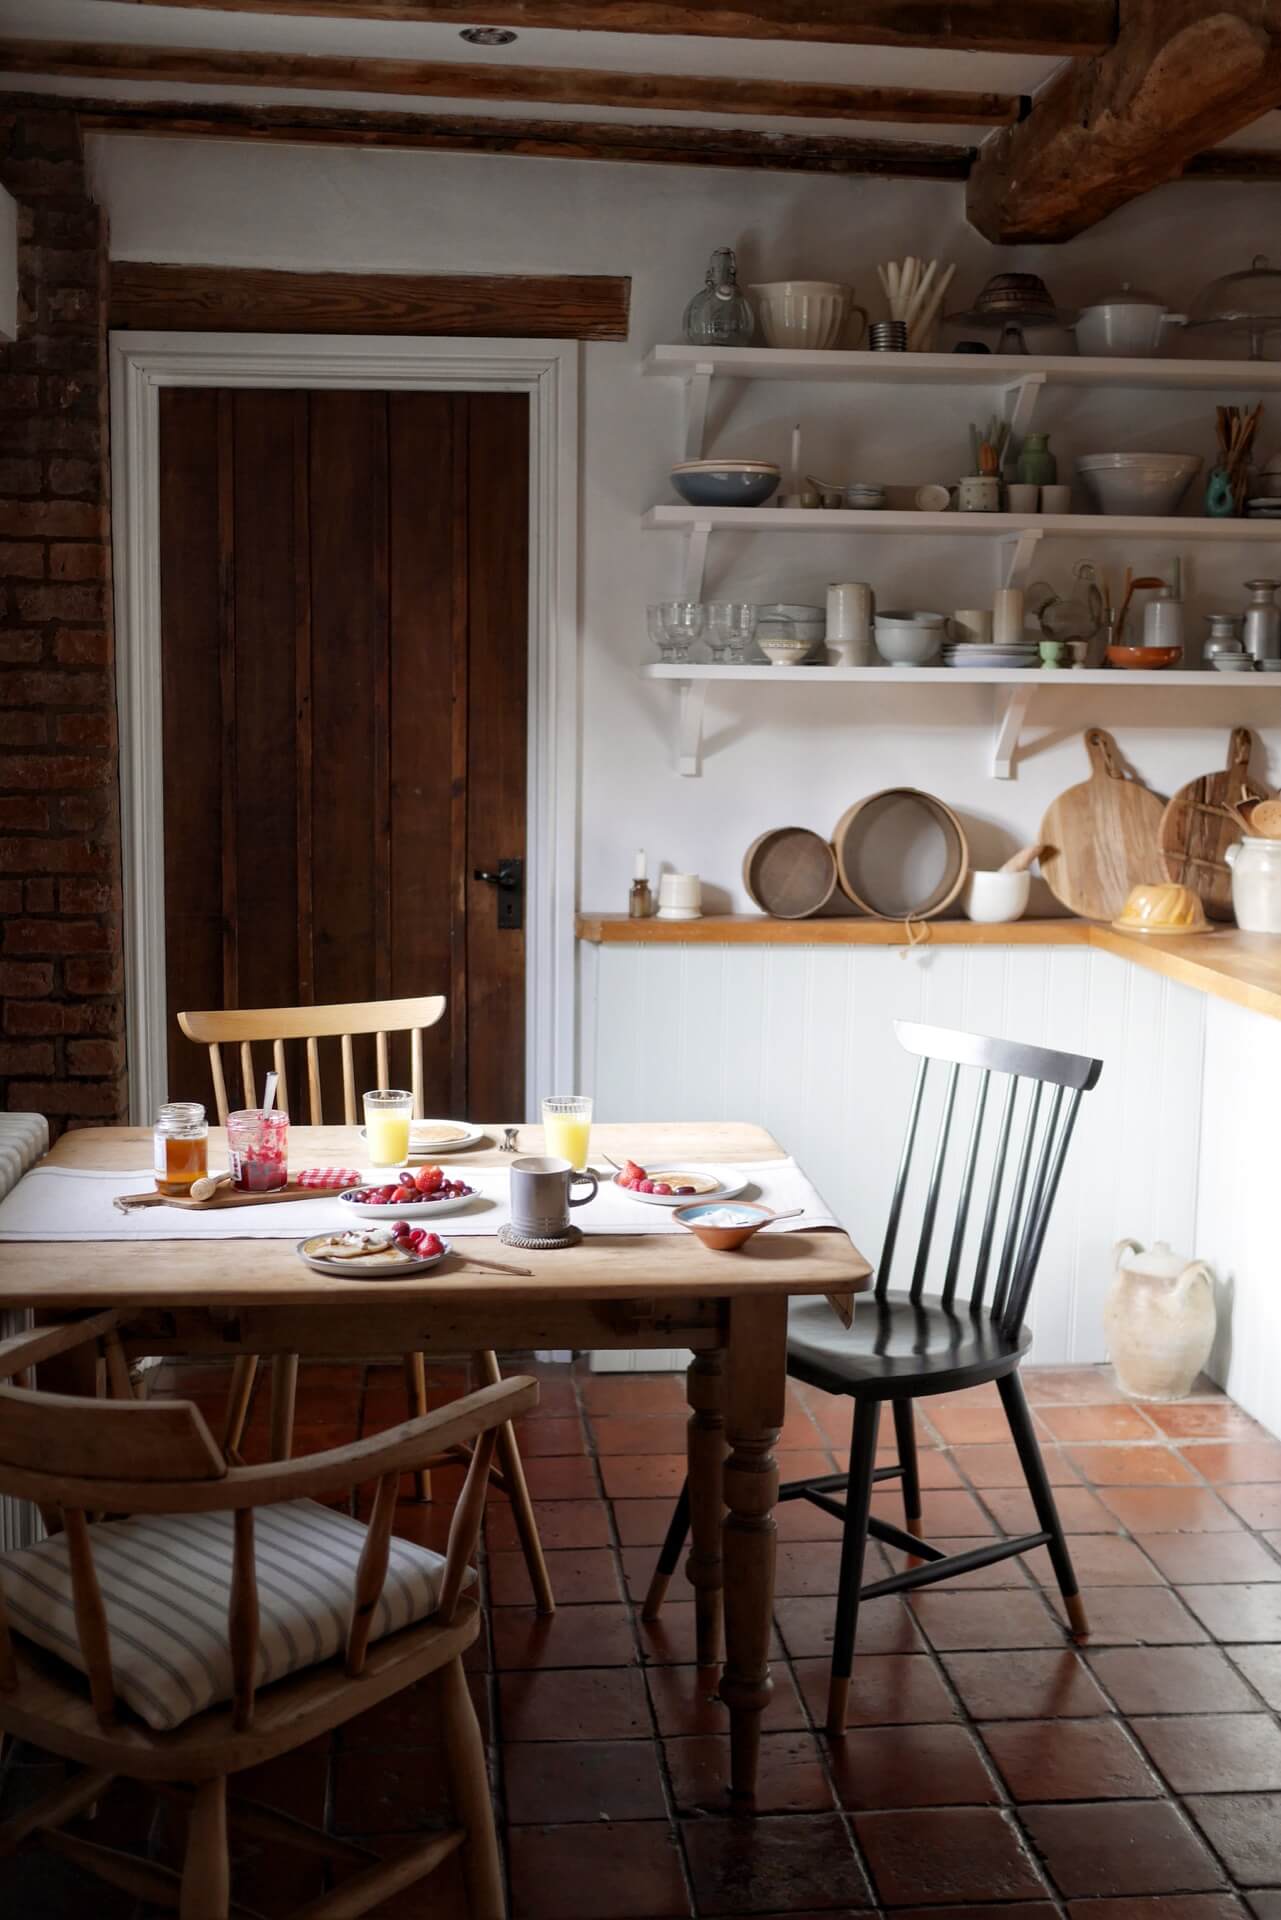 kitchen table laid for breakfast in a period home kitchen. home of Laura Jenkinson of Ticking Stripe Home